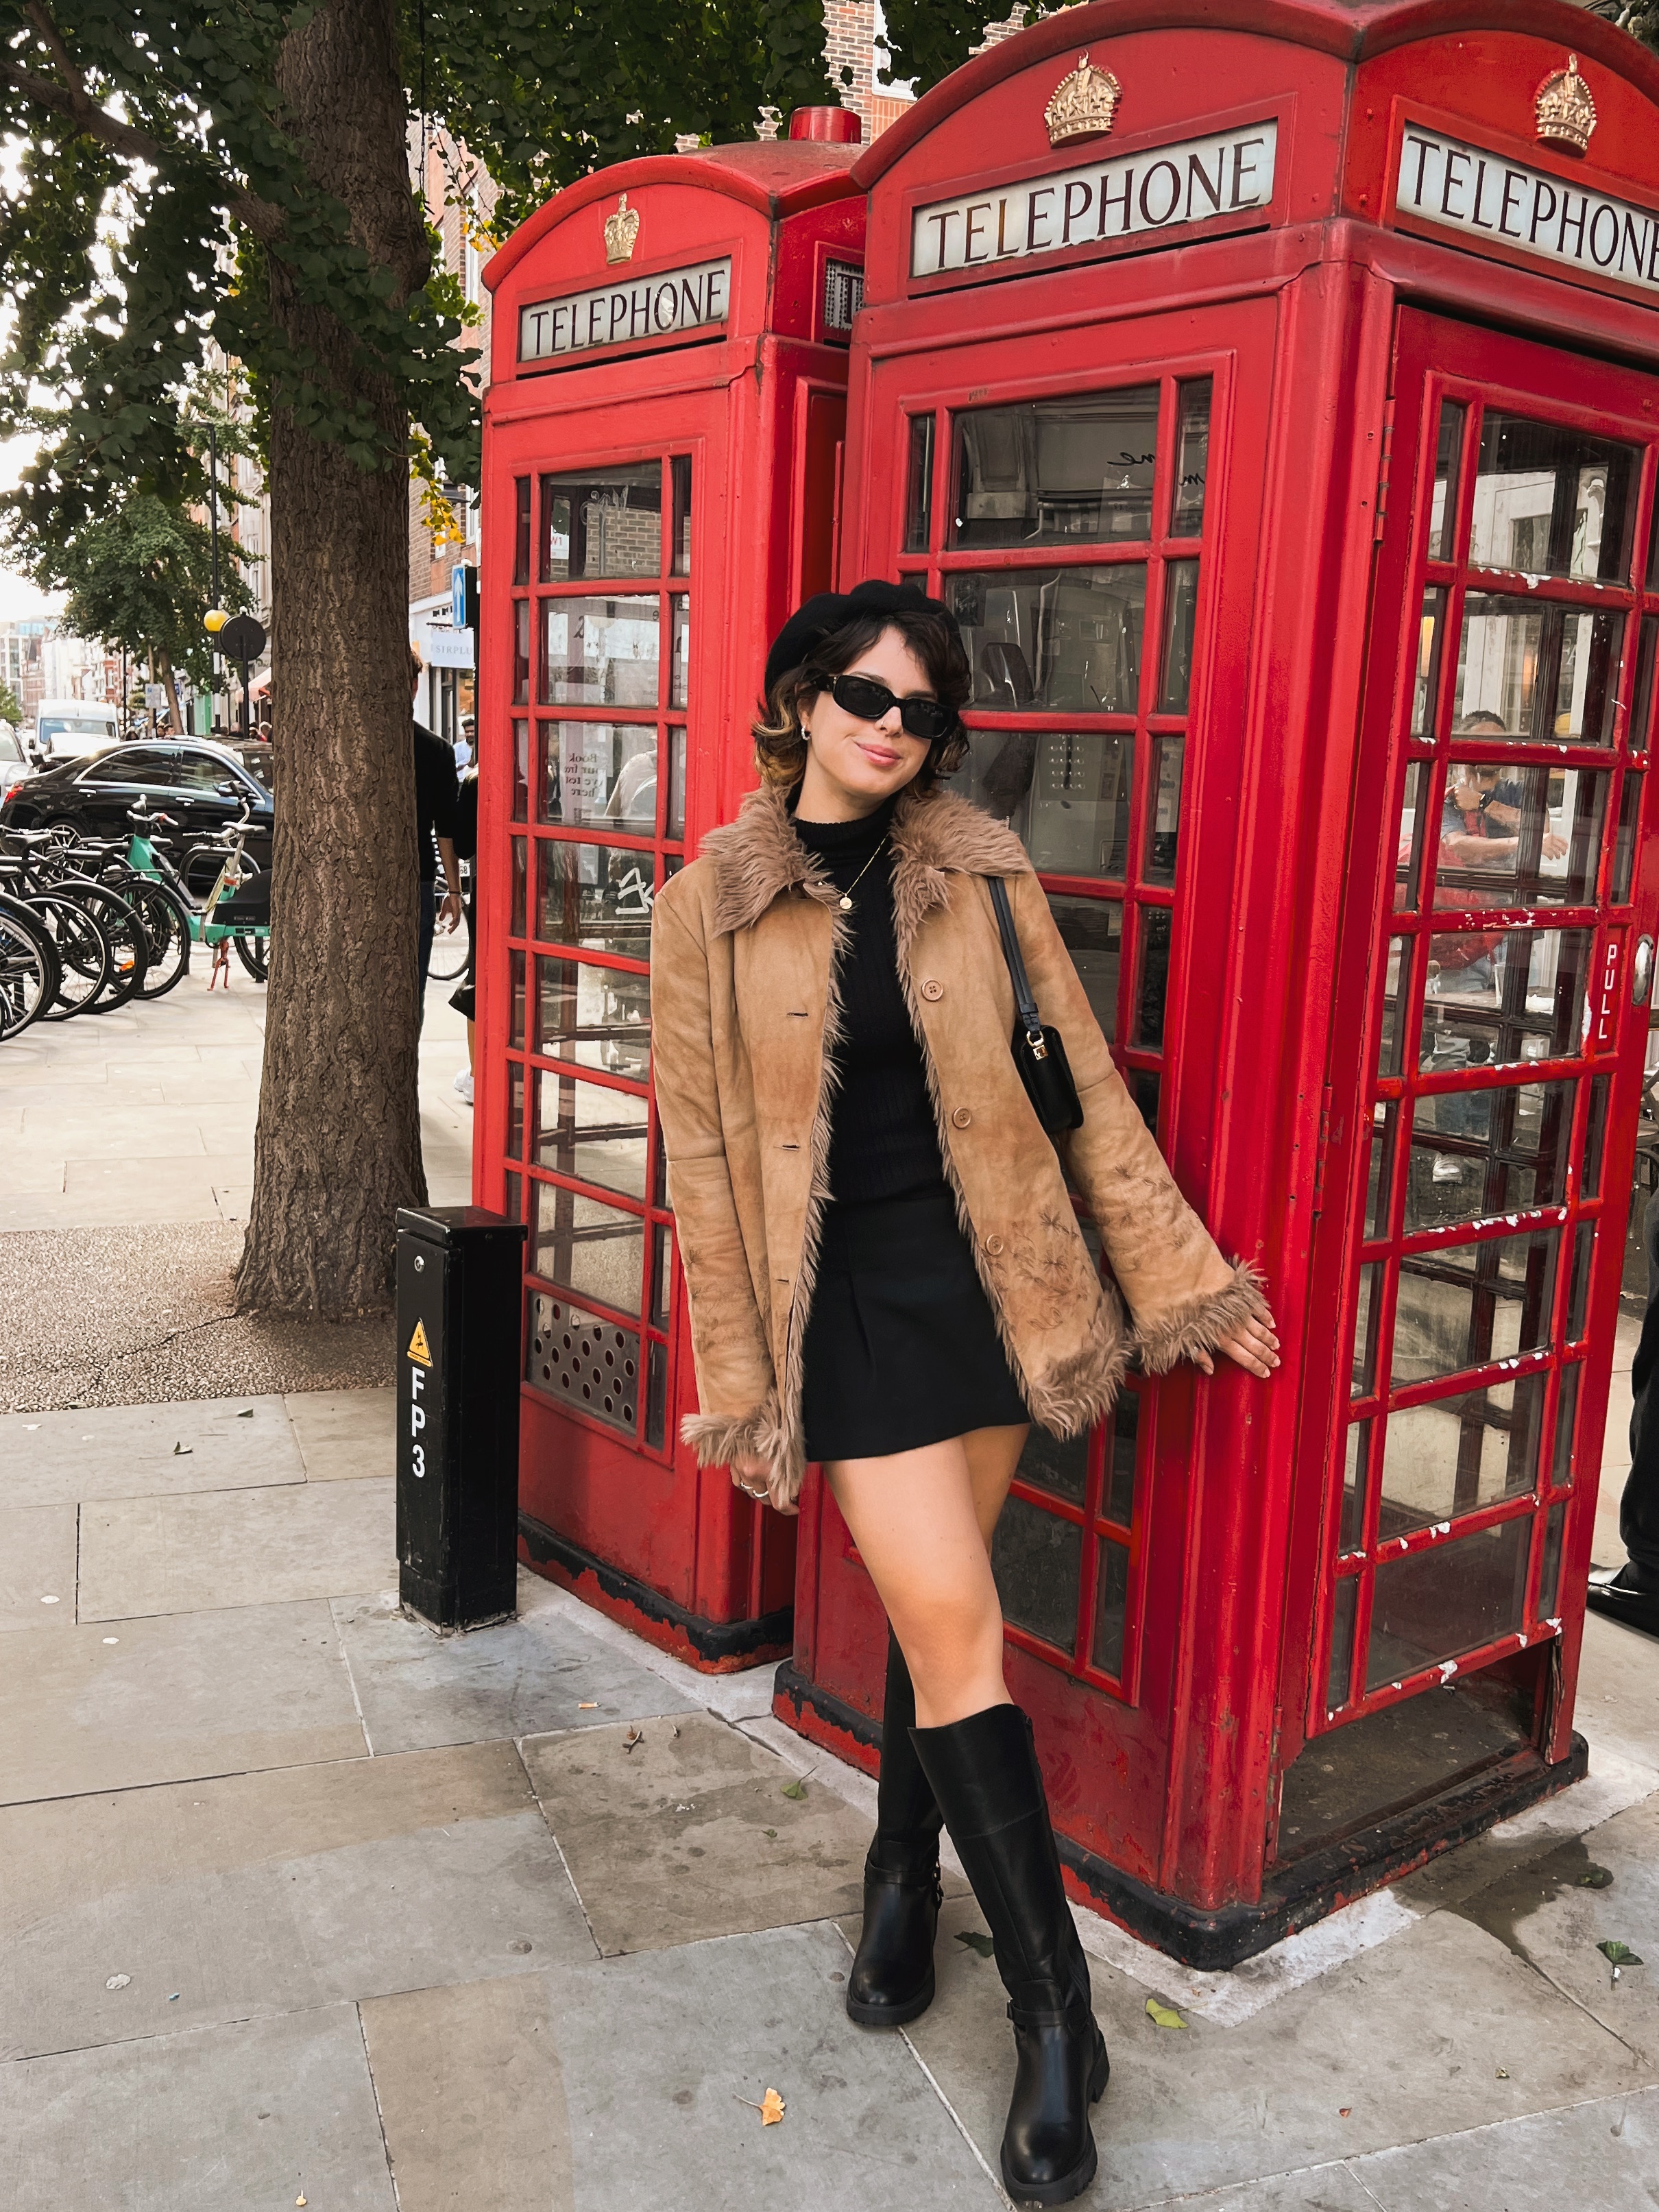 A young woman in short black dress, black boots, and faux fur coat with sunglasses poses in front of a red phone booth in London